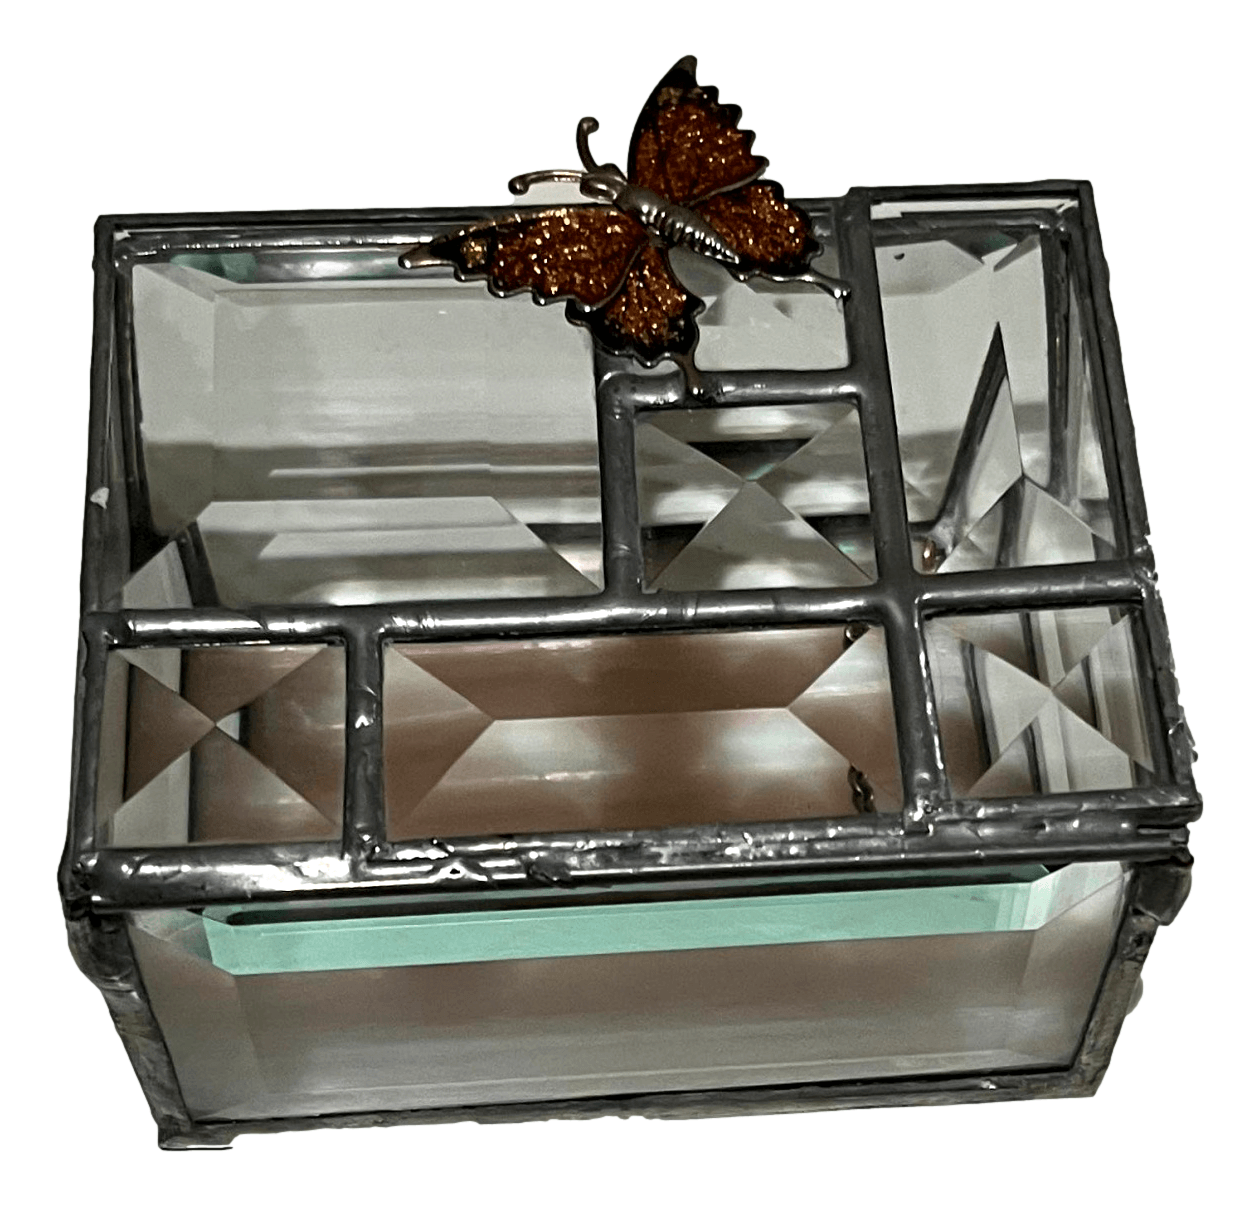 Box Flip Top Glass Orange Butterfly Accent L: 4 inches X W: 3 inches H: 2 inches - Ysleta Mission Gift Shop- VOTED El Paso's Best Gift Shop